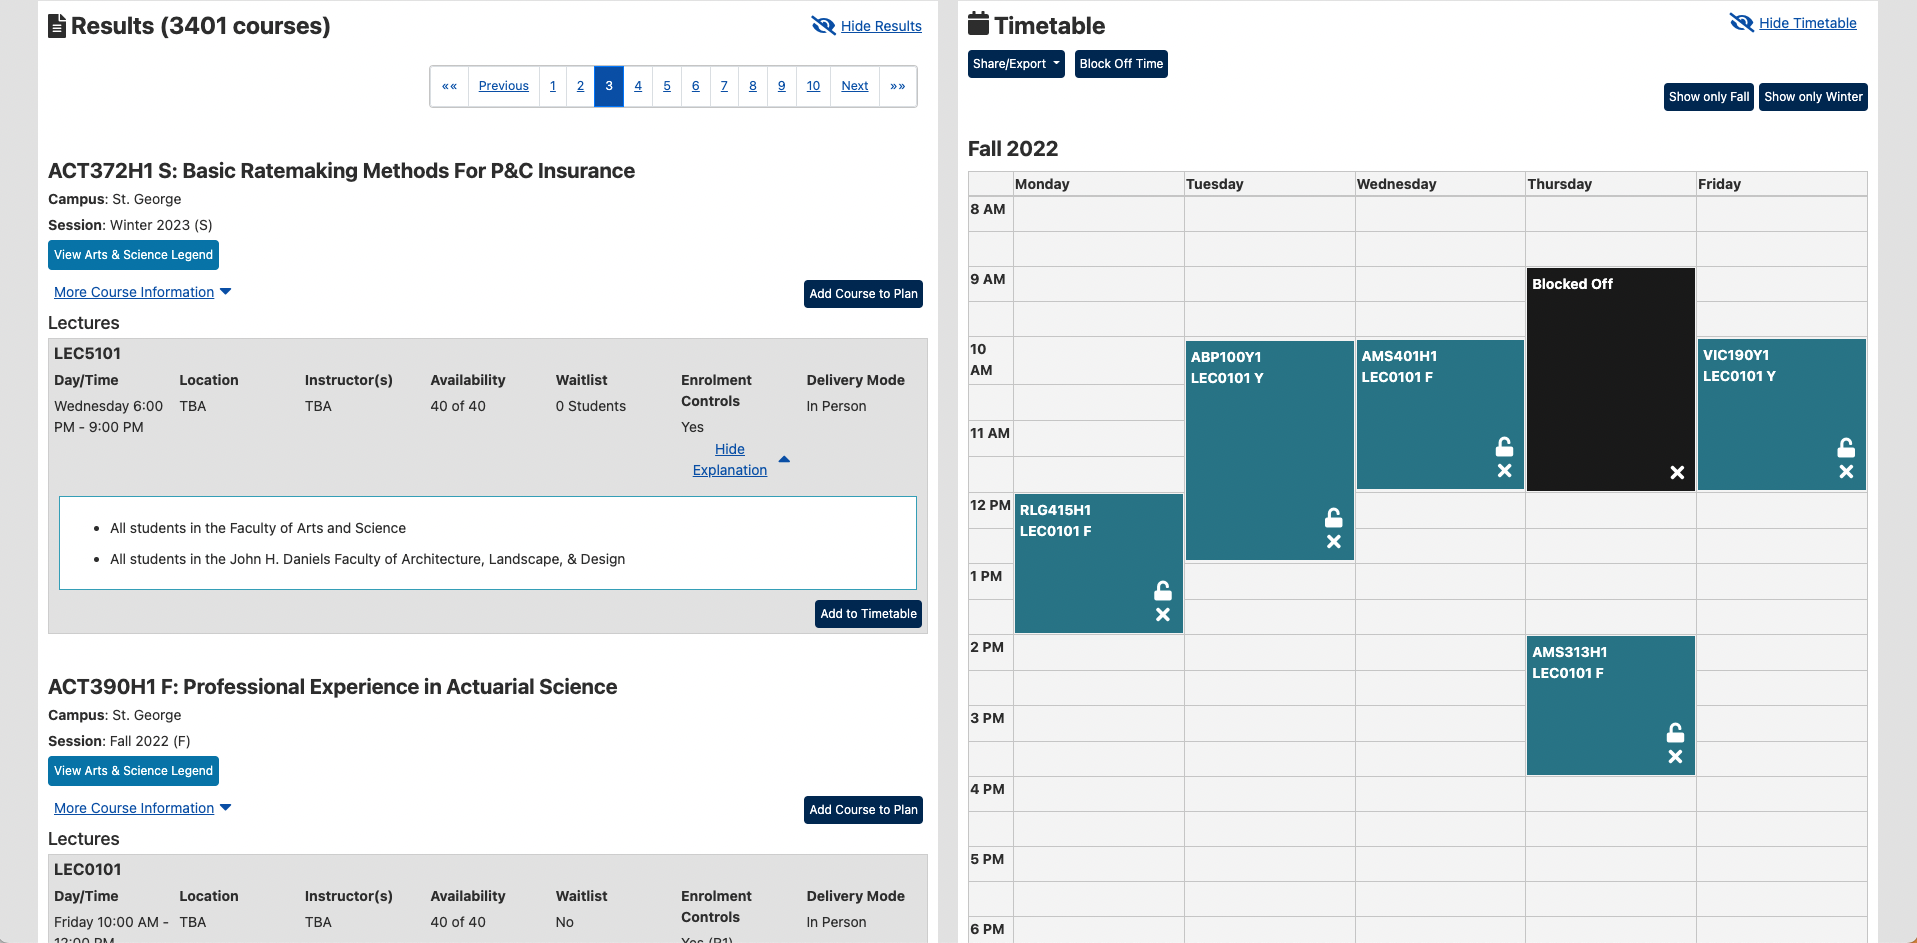 Timetable Builder application interface showing course details as well as a visual representation of timetable.